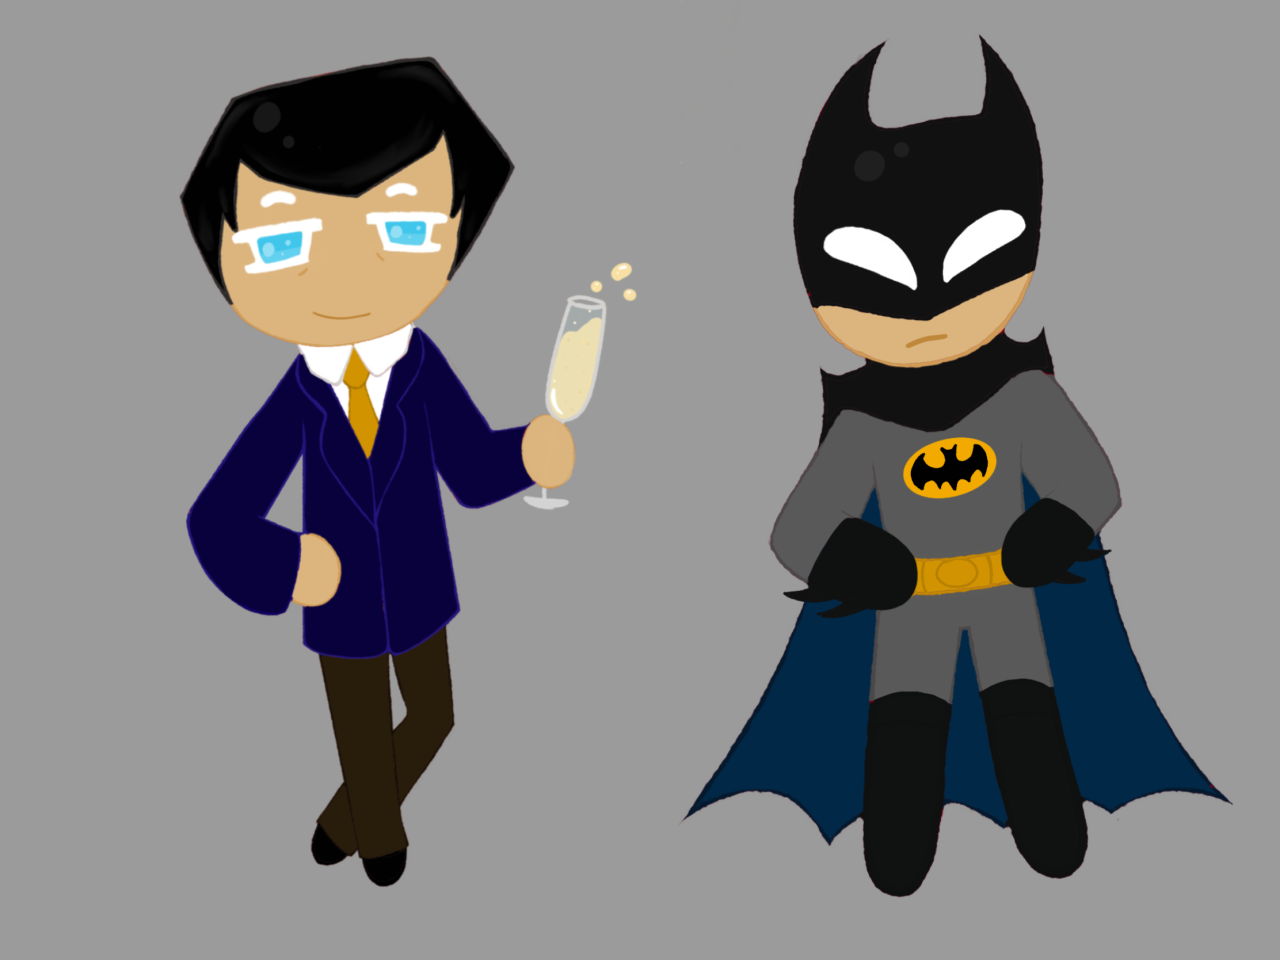 I drew Bruce Wayne as a cookie in both his civilian persona and as batman.